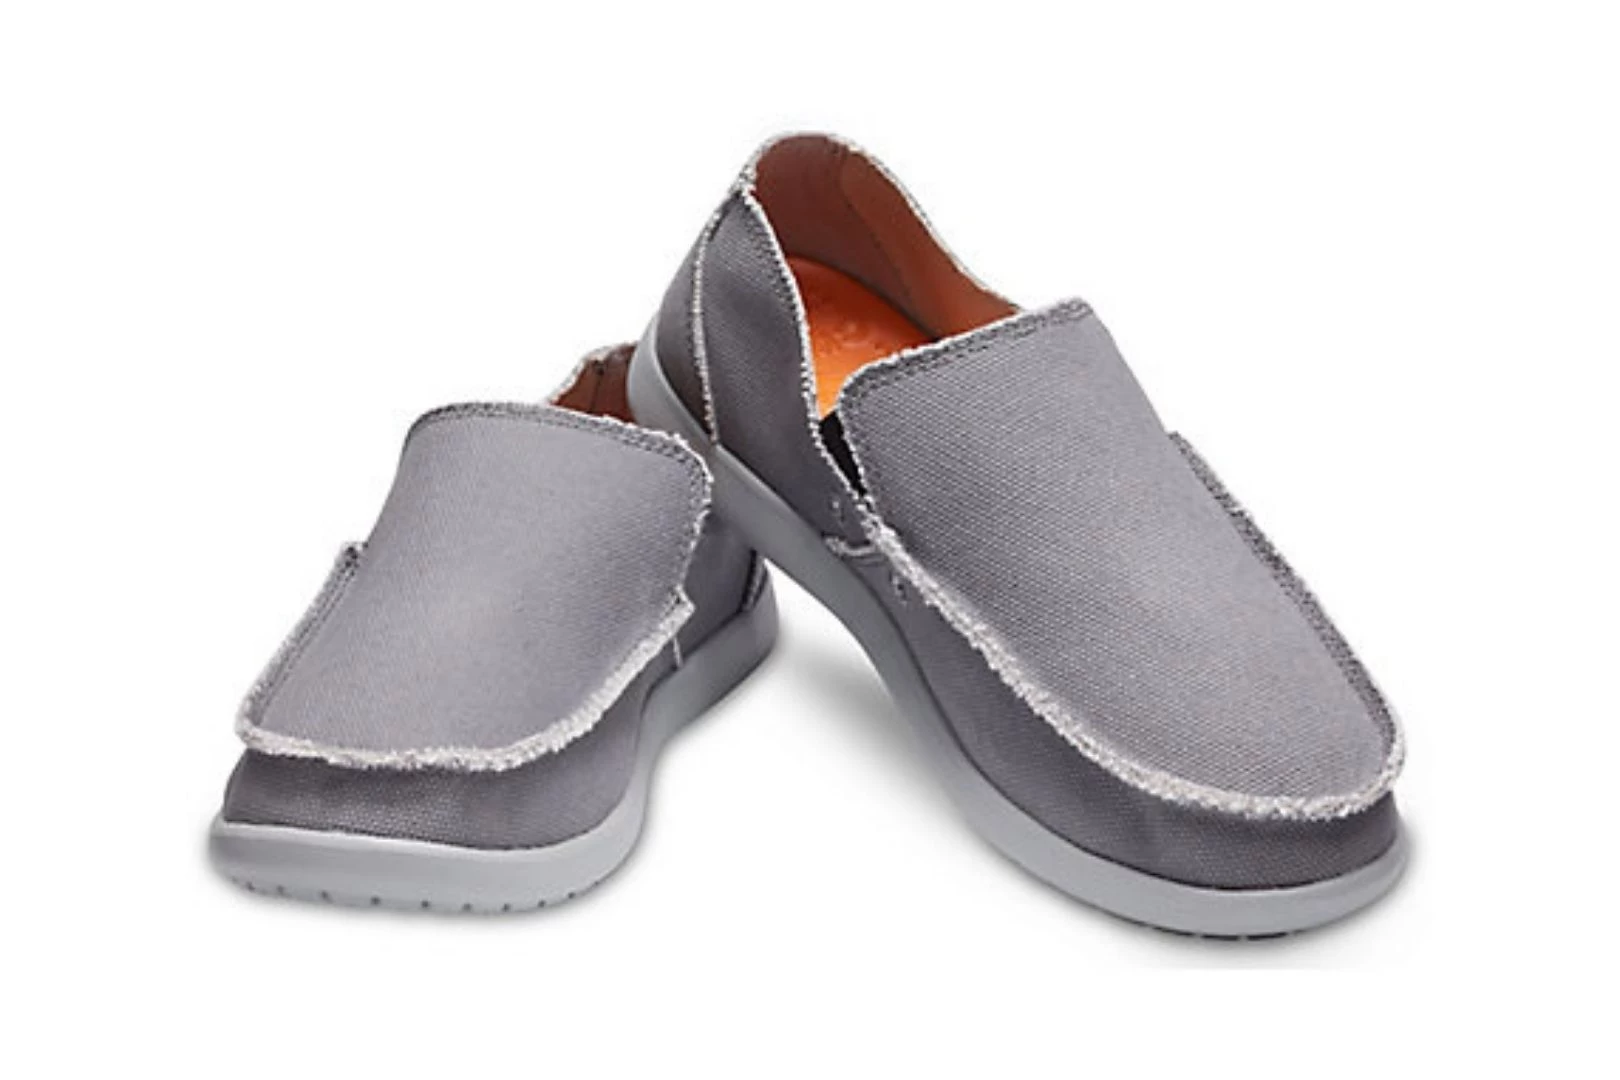 slip on shoes without socks